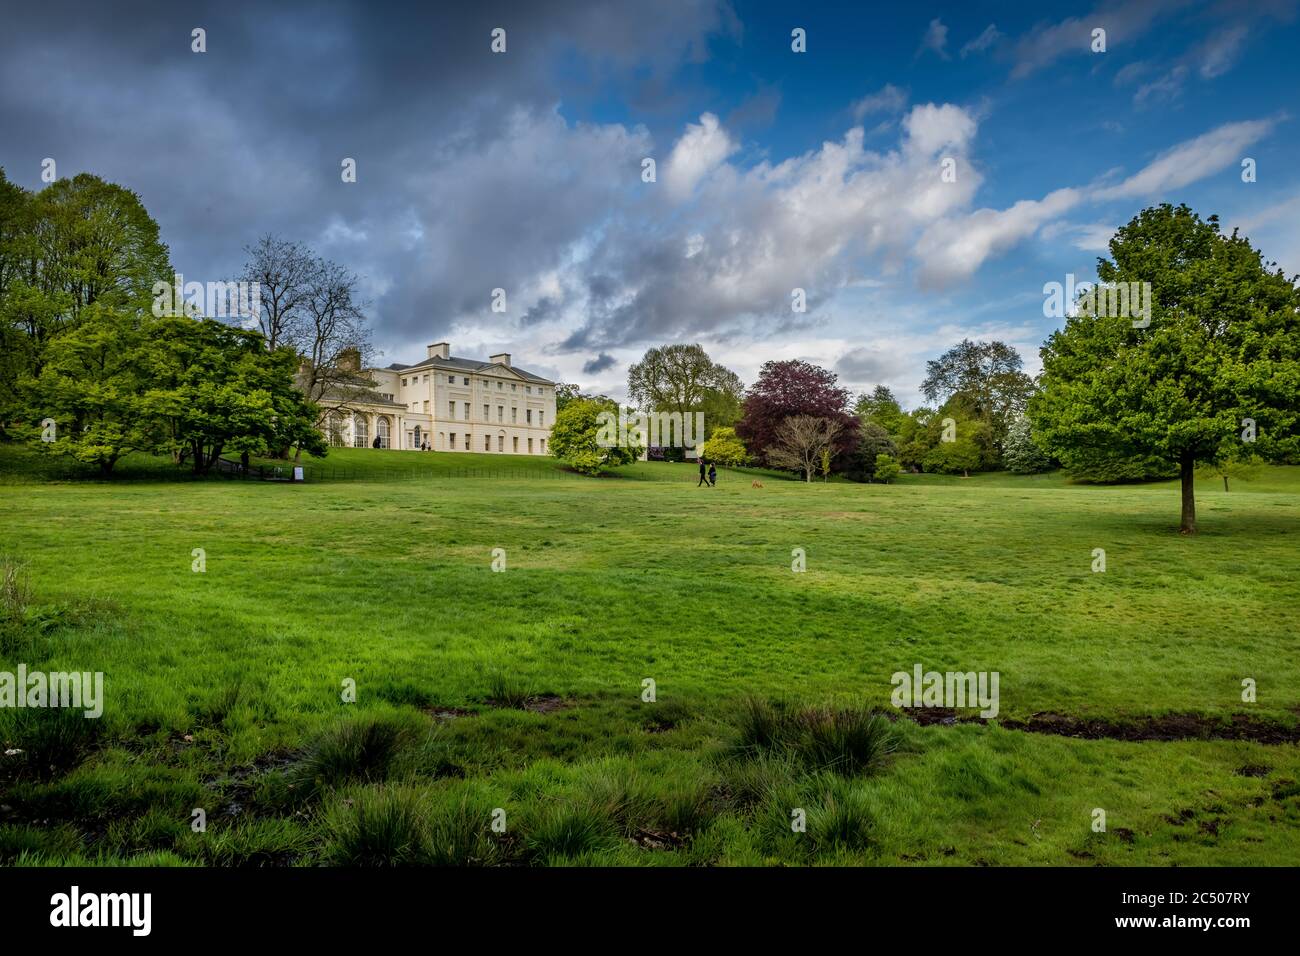 Kenwood House and the surrounding grounds in Spring time with lush green grass and trees on a beautiful day with blue sky clouds. Stock Photo